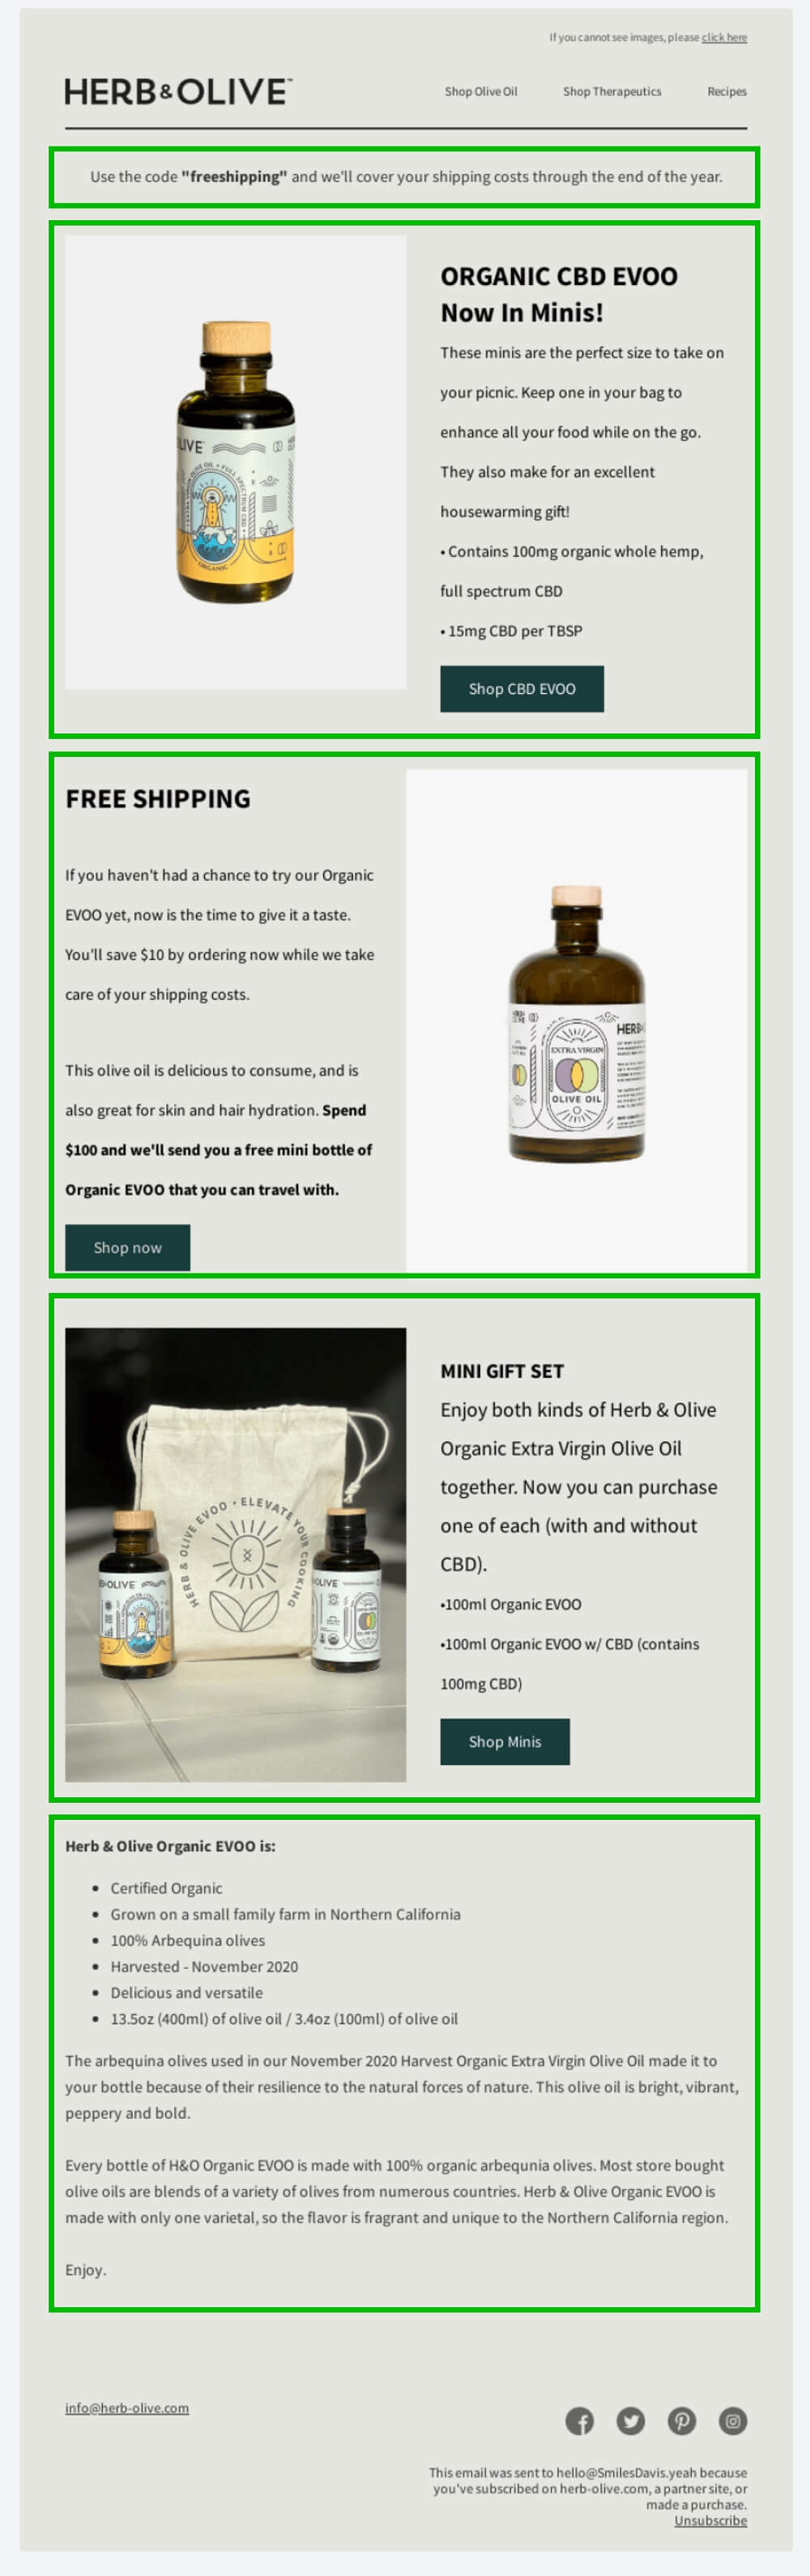 Herb & Olive email content blocks